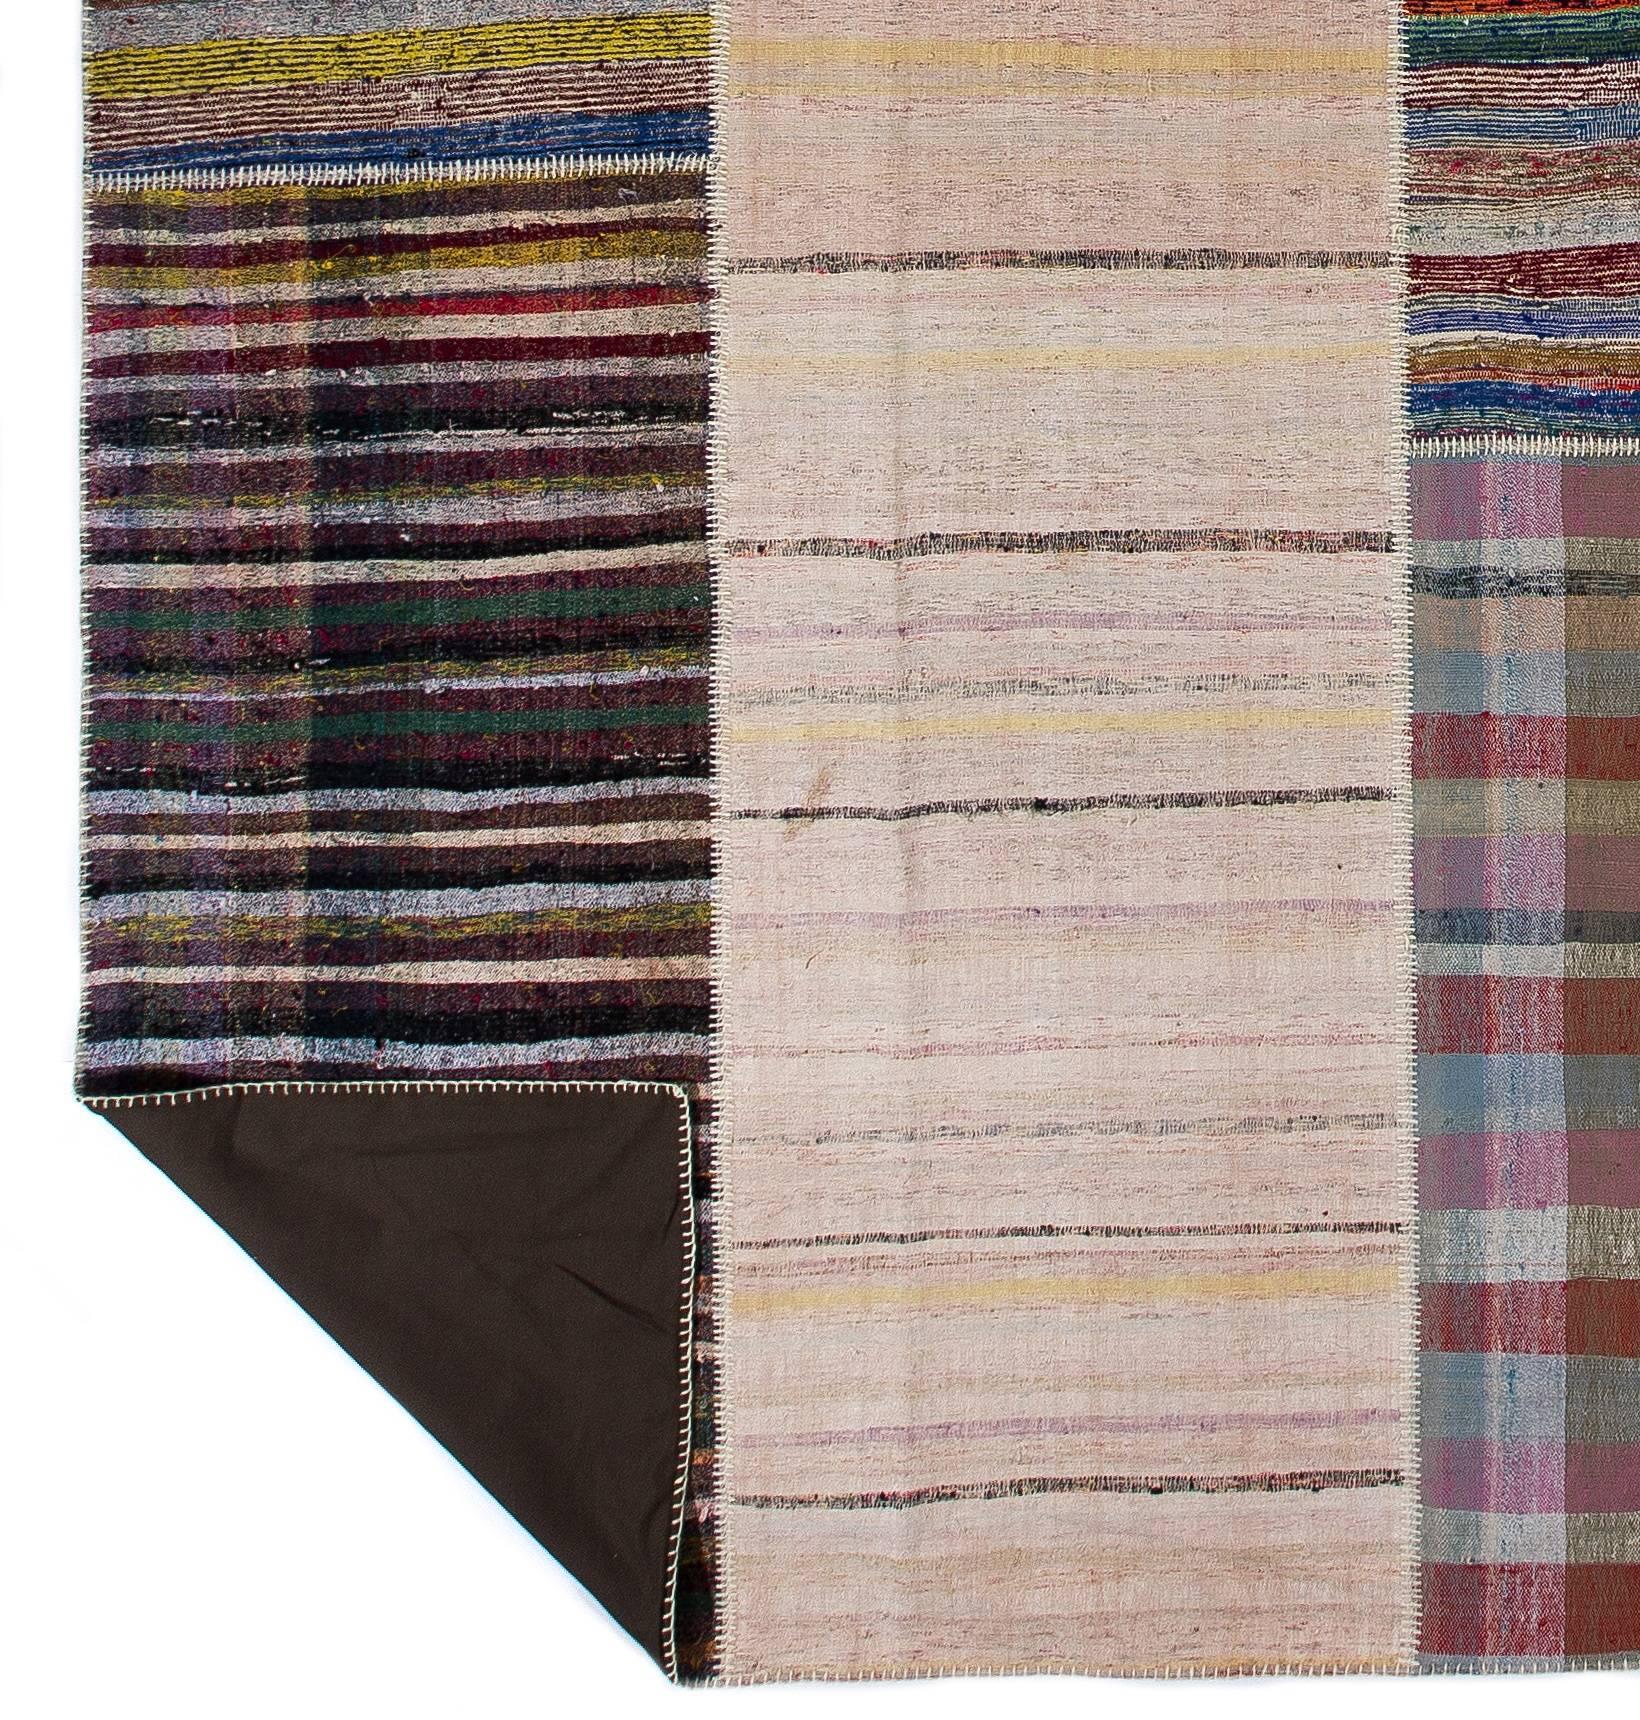 These authentic flat-weaves (Kilims) from Eastern Turkey were handwoven by nomads, circa 21st century to be used as floor coverings in their tents and winter homes. They were made to use for everyday life rather than re-sale and export purposes and